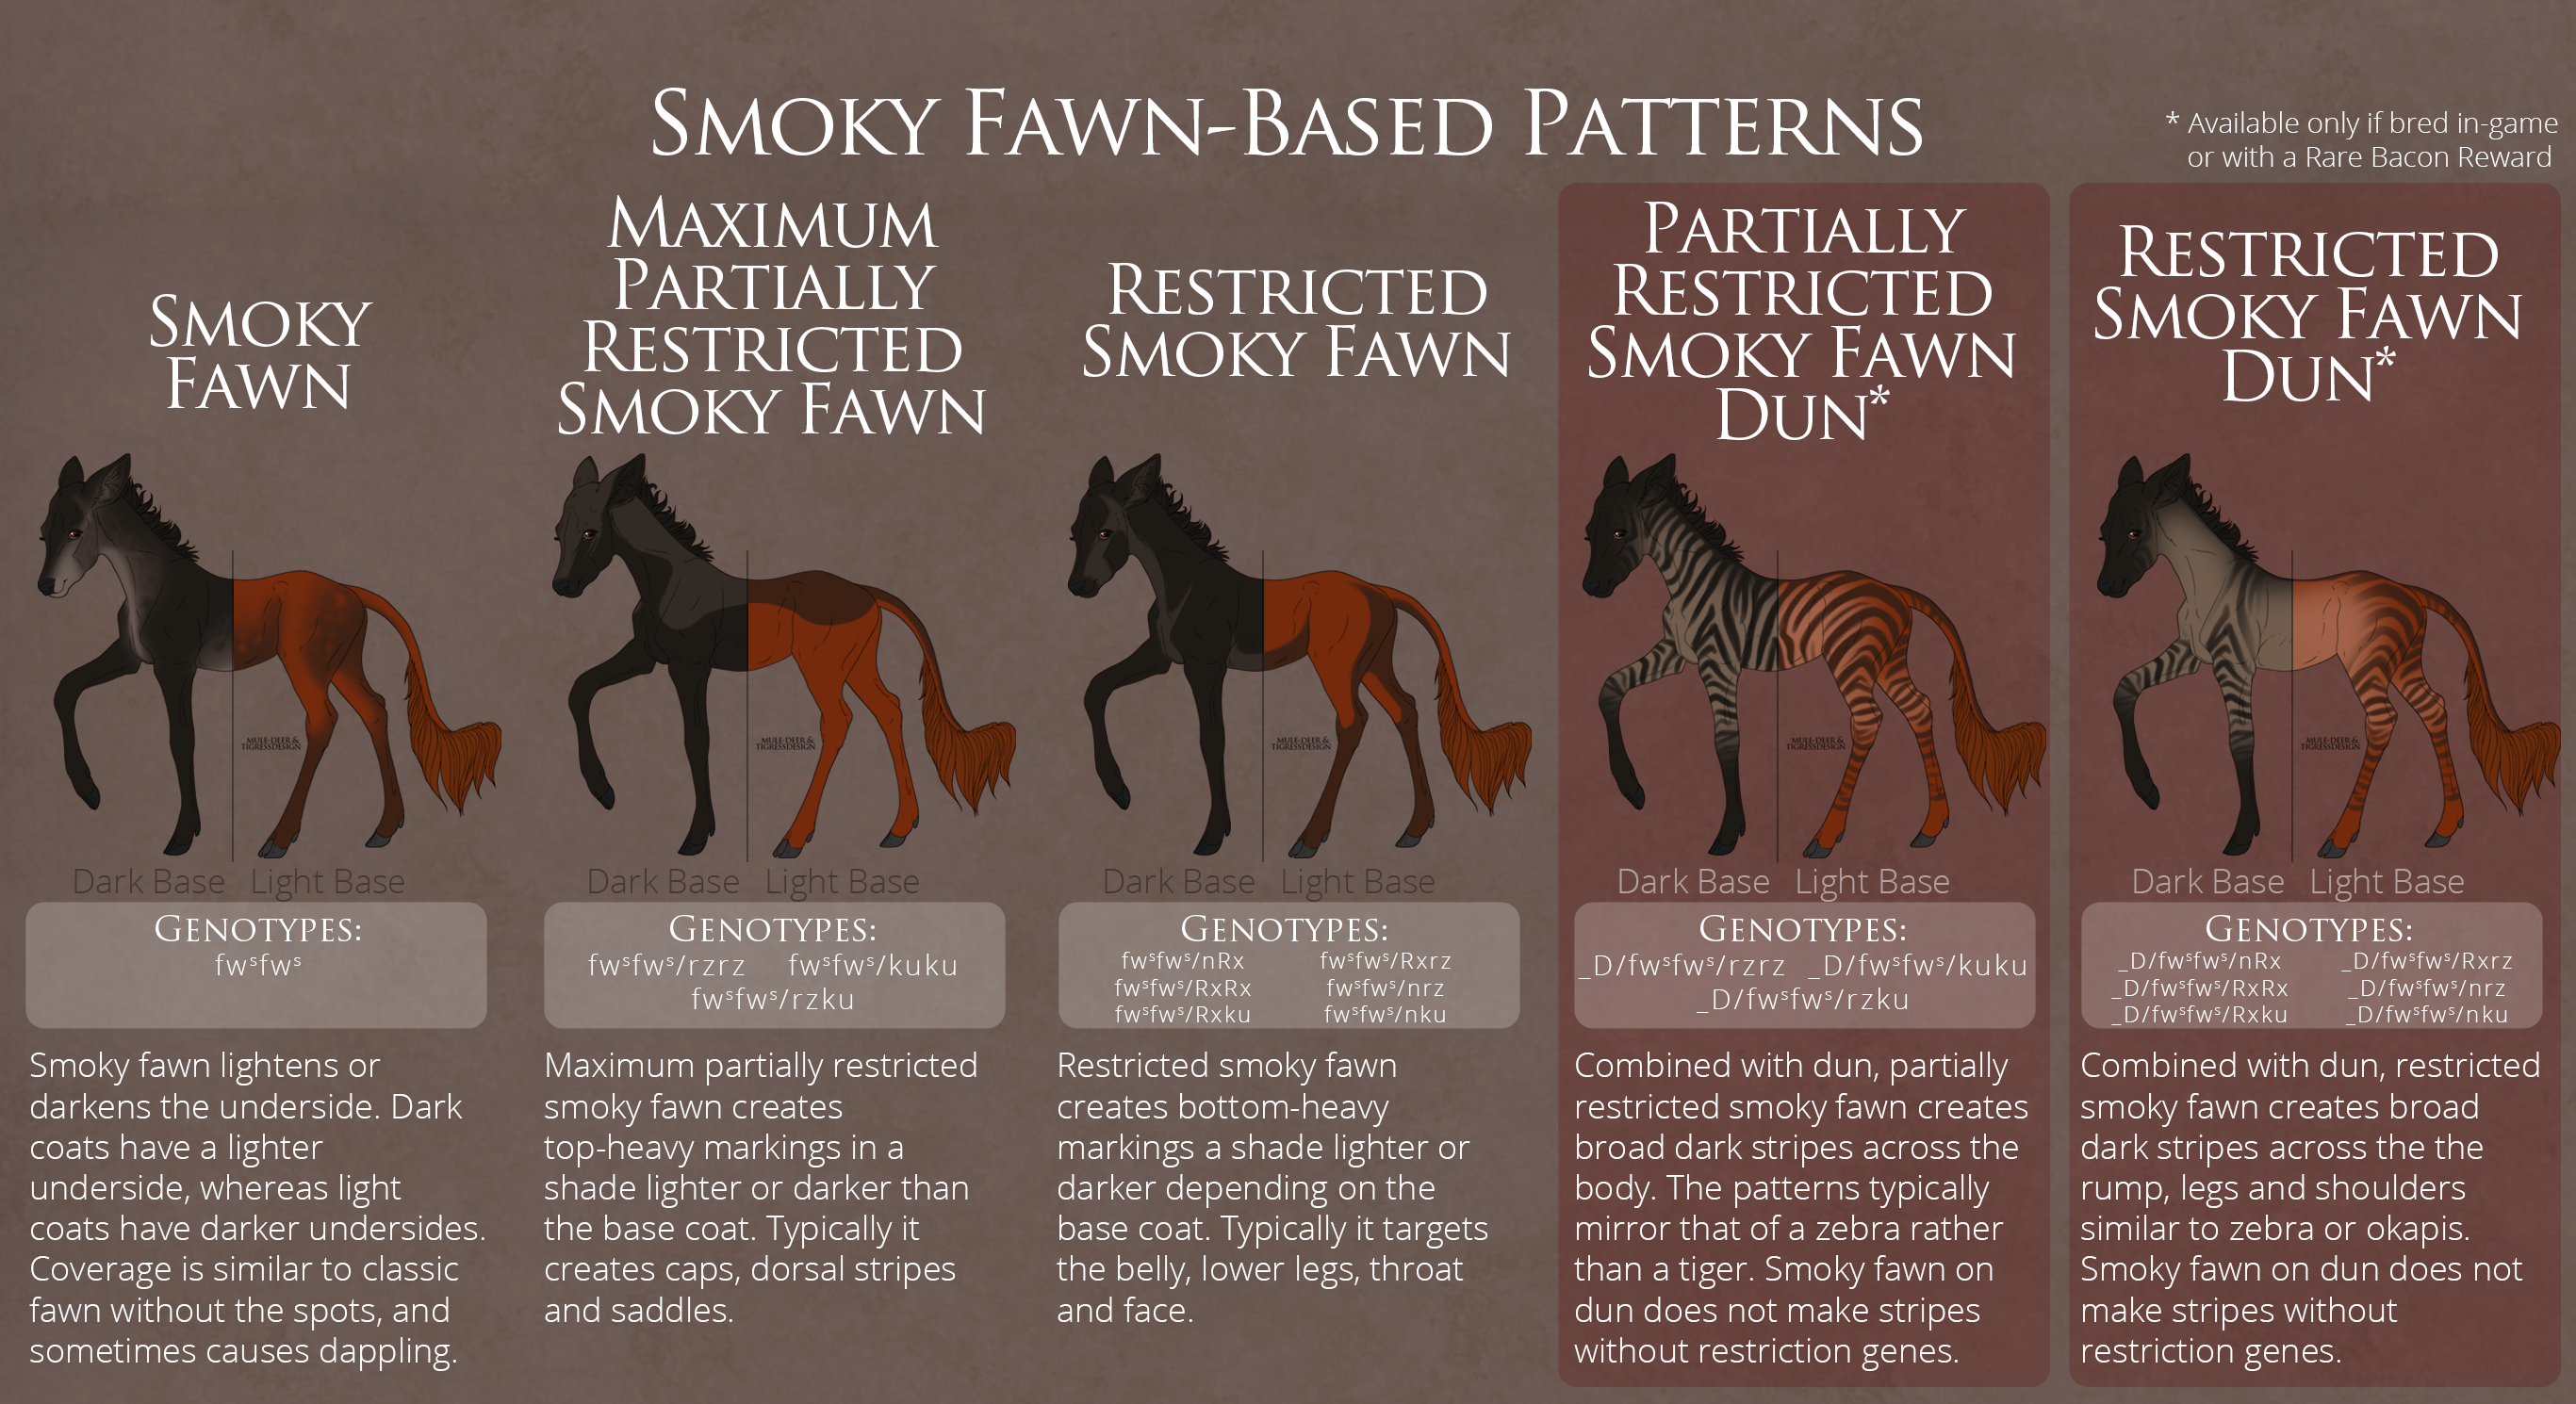 Smoky Fawn-Based Patterns Overview